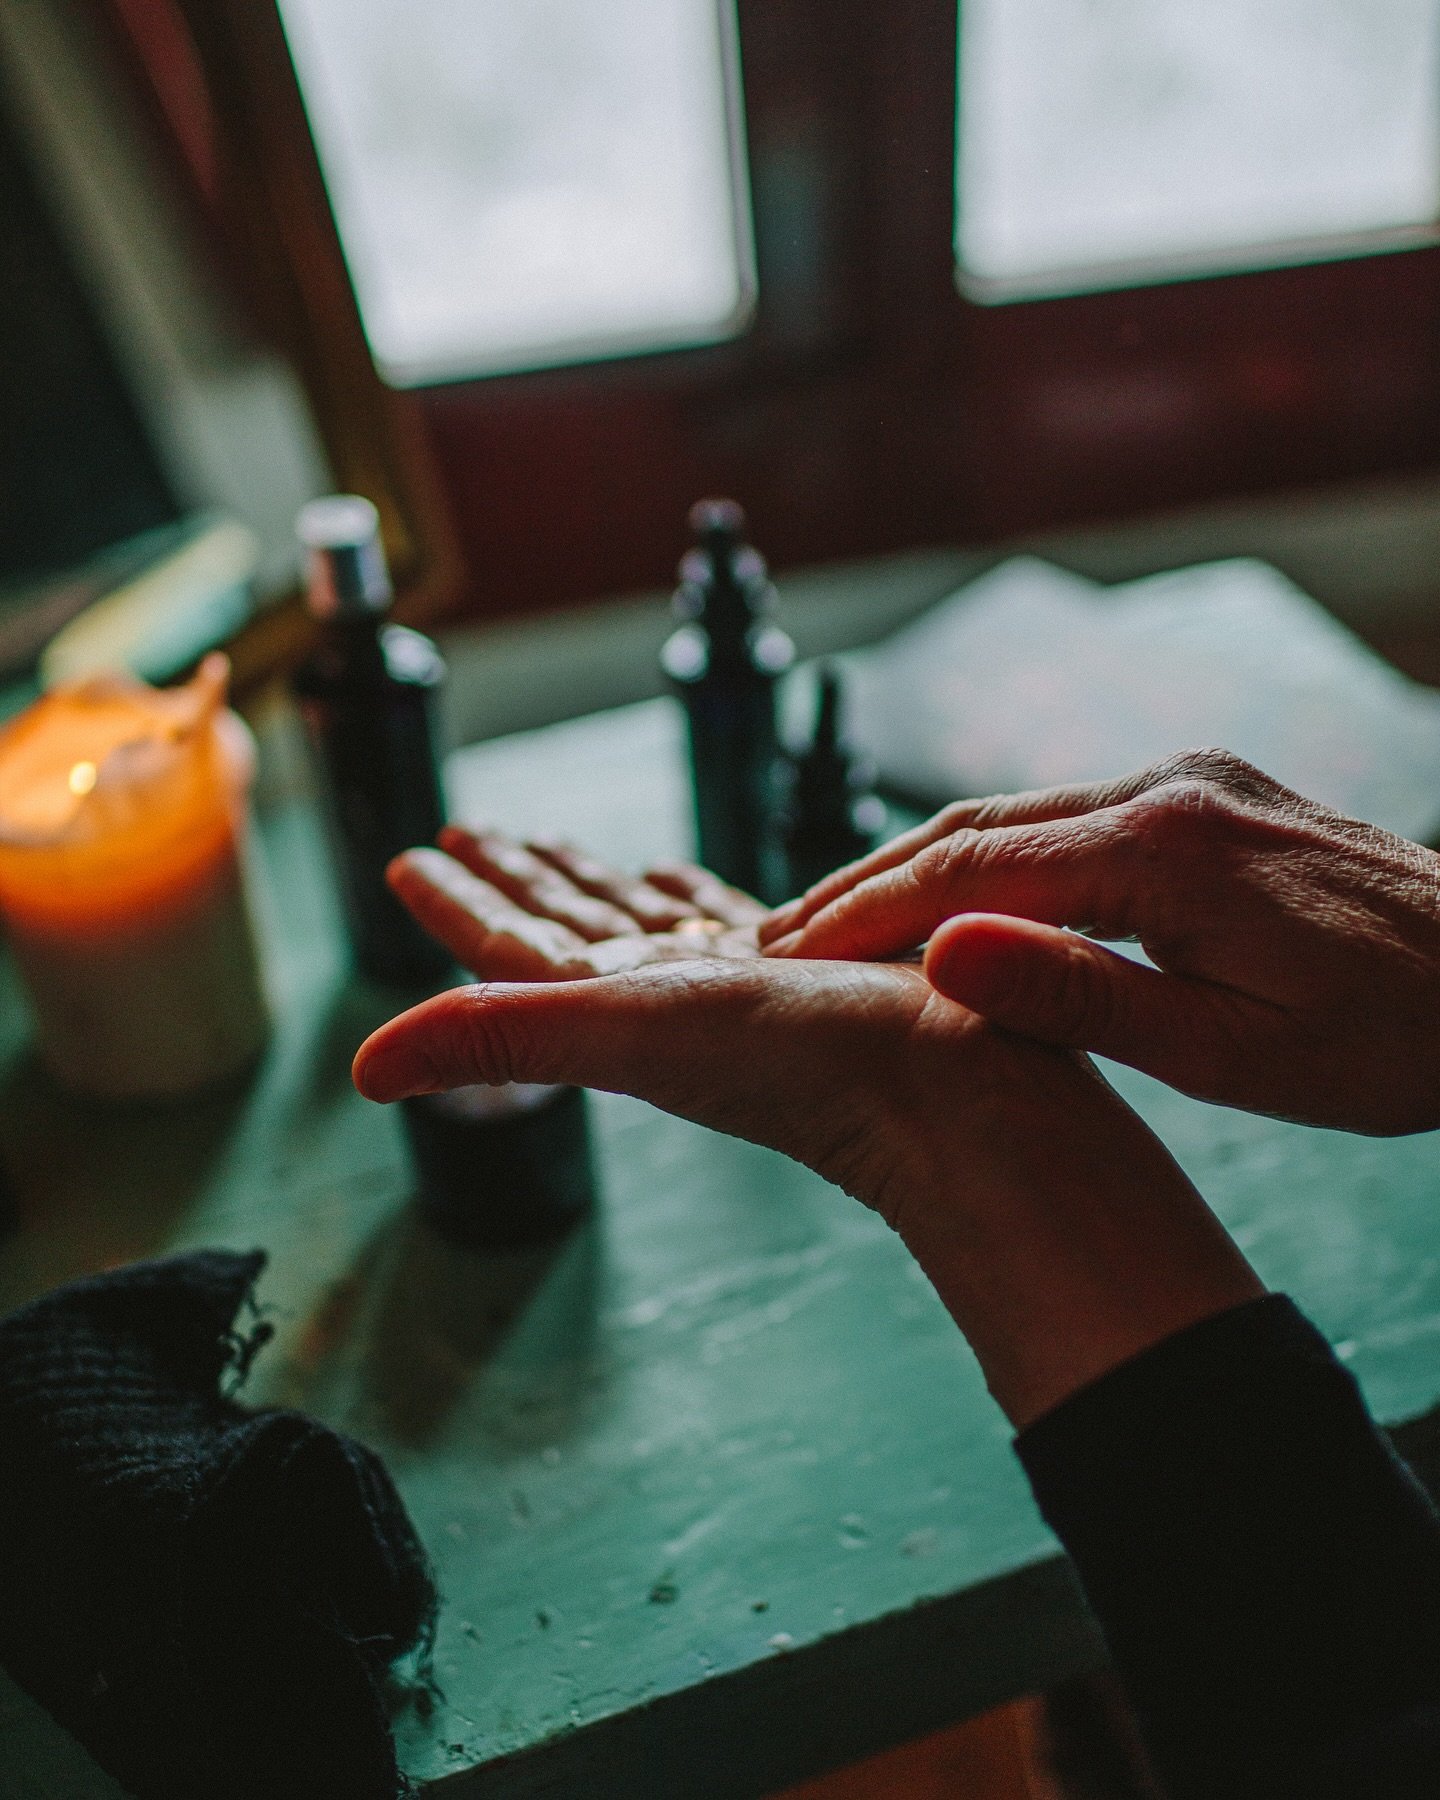 On CONNECTION

Connect with yourself and nature through small, meaningful rituals that nourish your body and mind. Early evening, light a candle, clear your space with a sage smudge stick and prepare a seasonal plant tea infusion. 

Cleanse your face